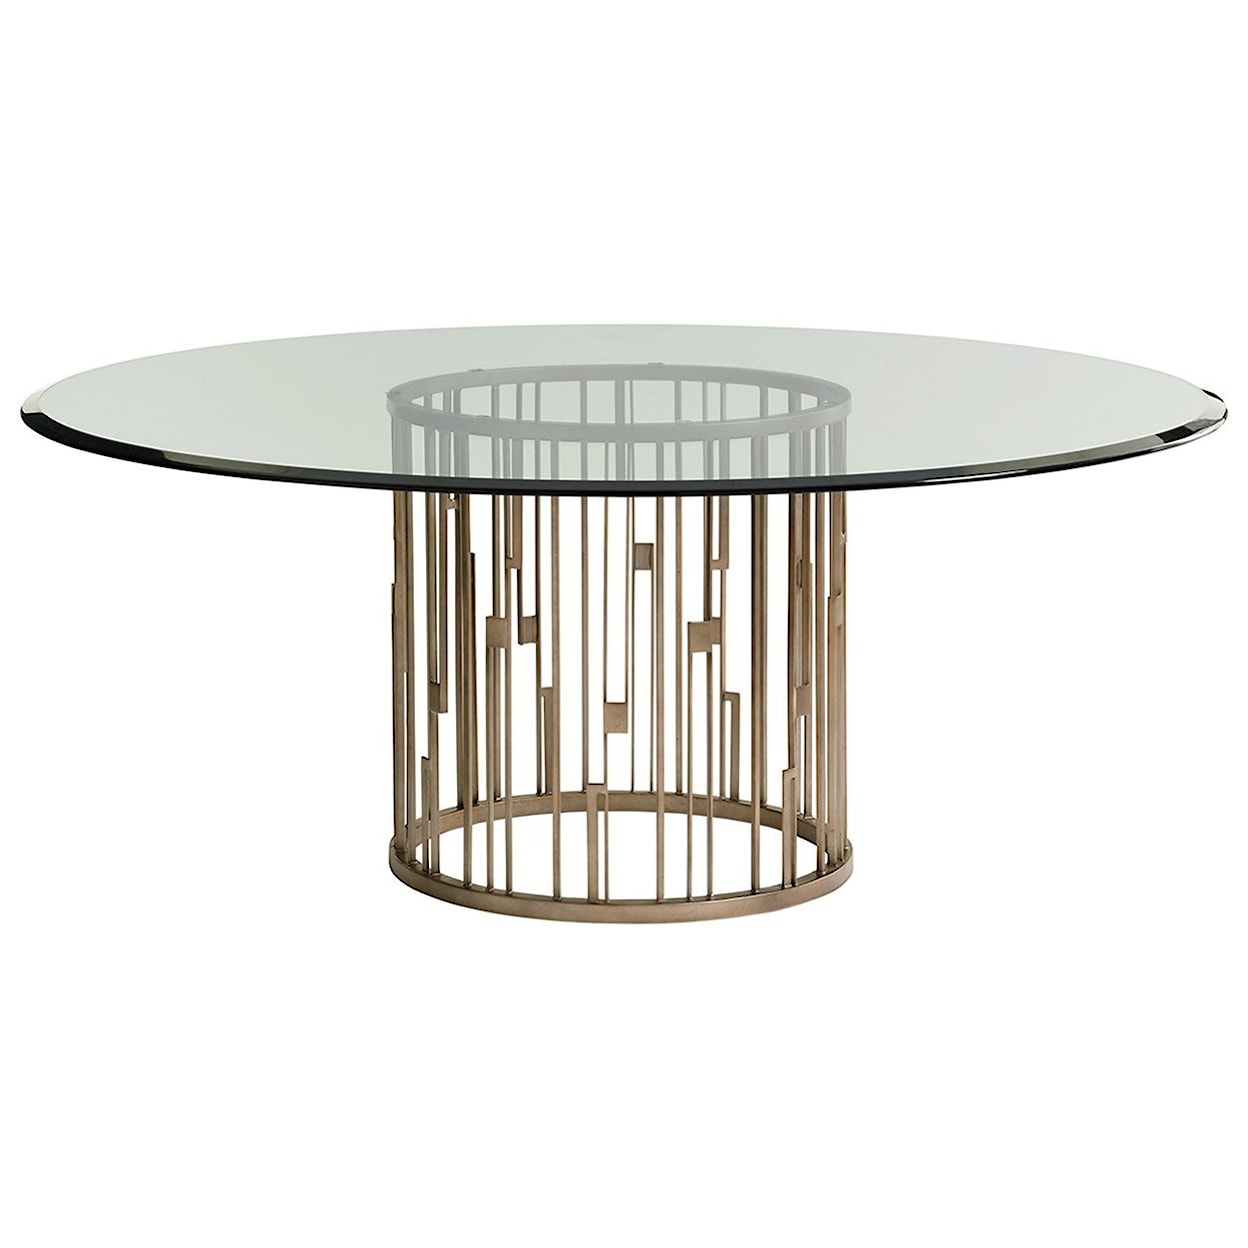 Lexington Shadow Play Rendezvous Dining Table with Glass Top